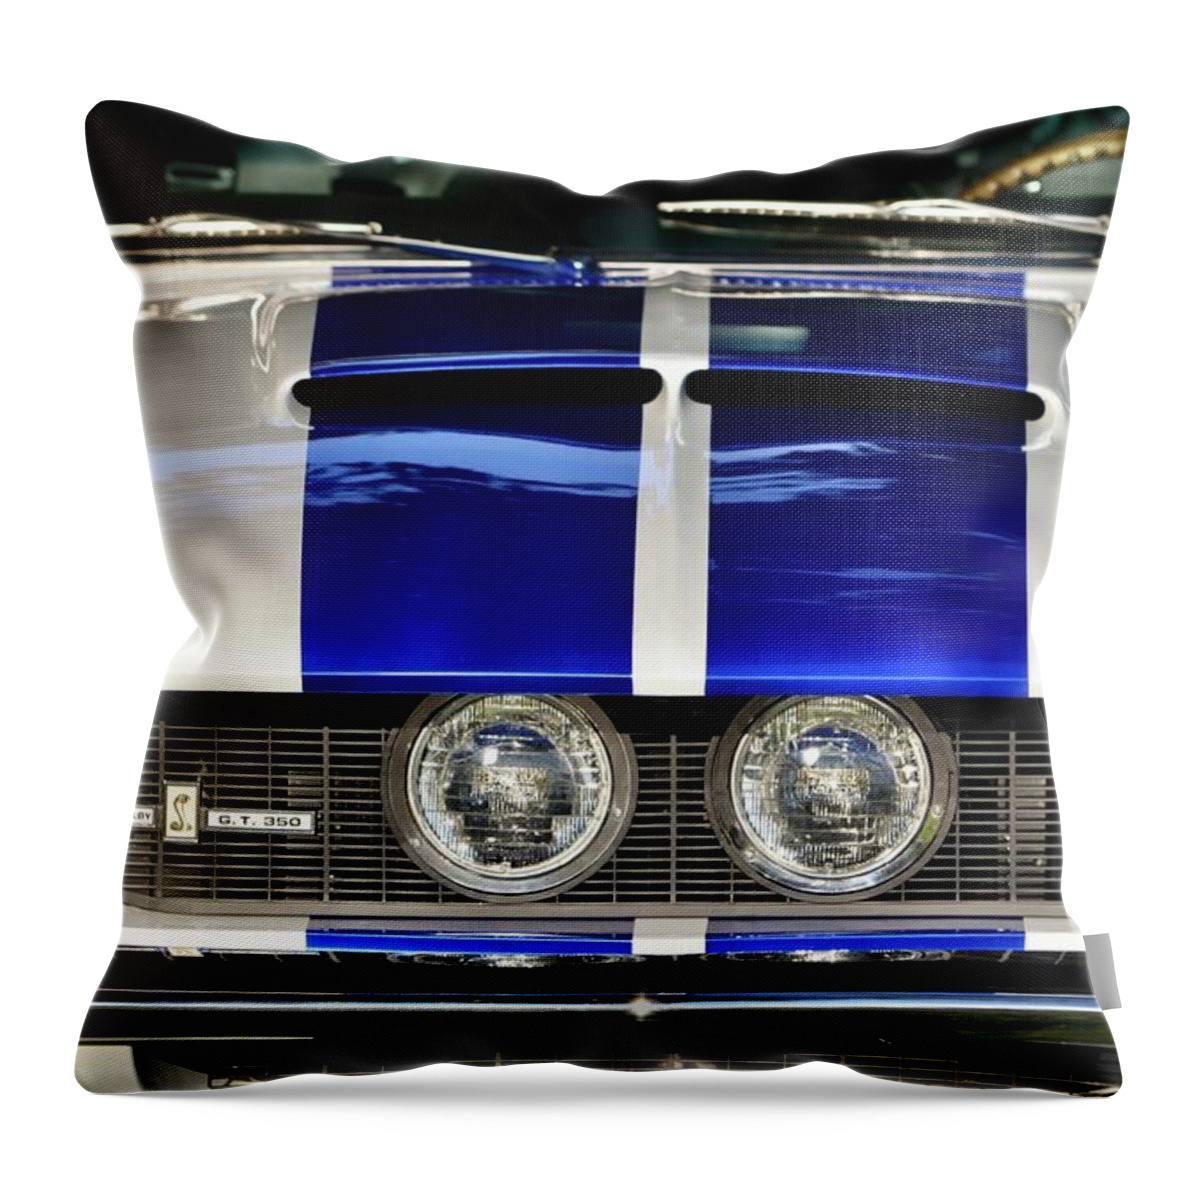  Throw Pillow featuring the photograph Shelby #2 by Dean Ferreira